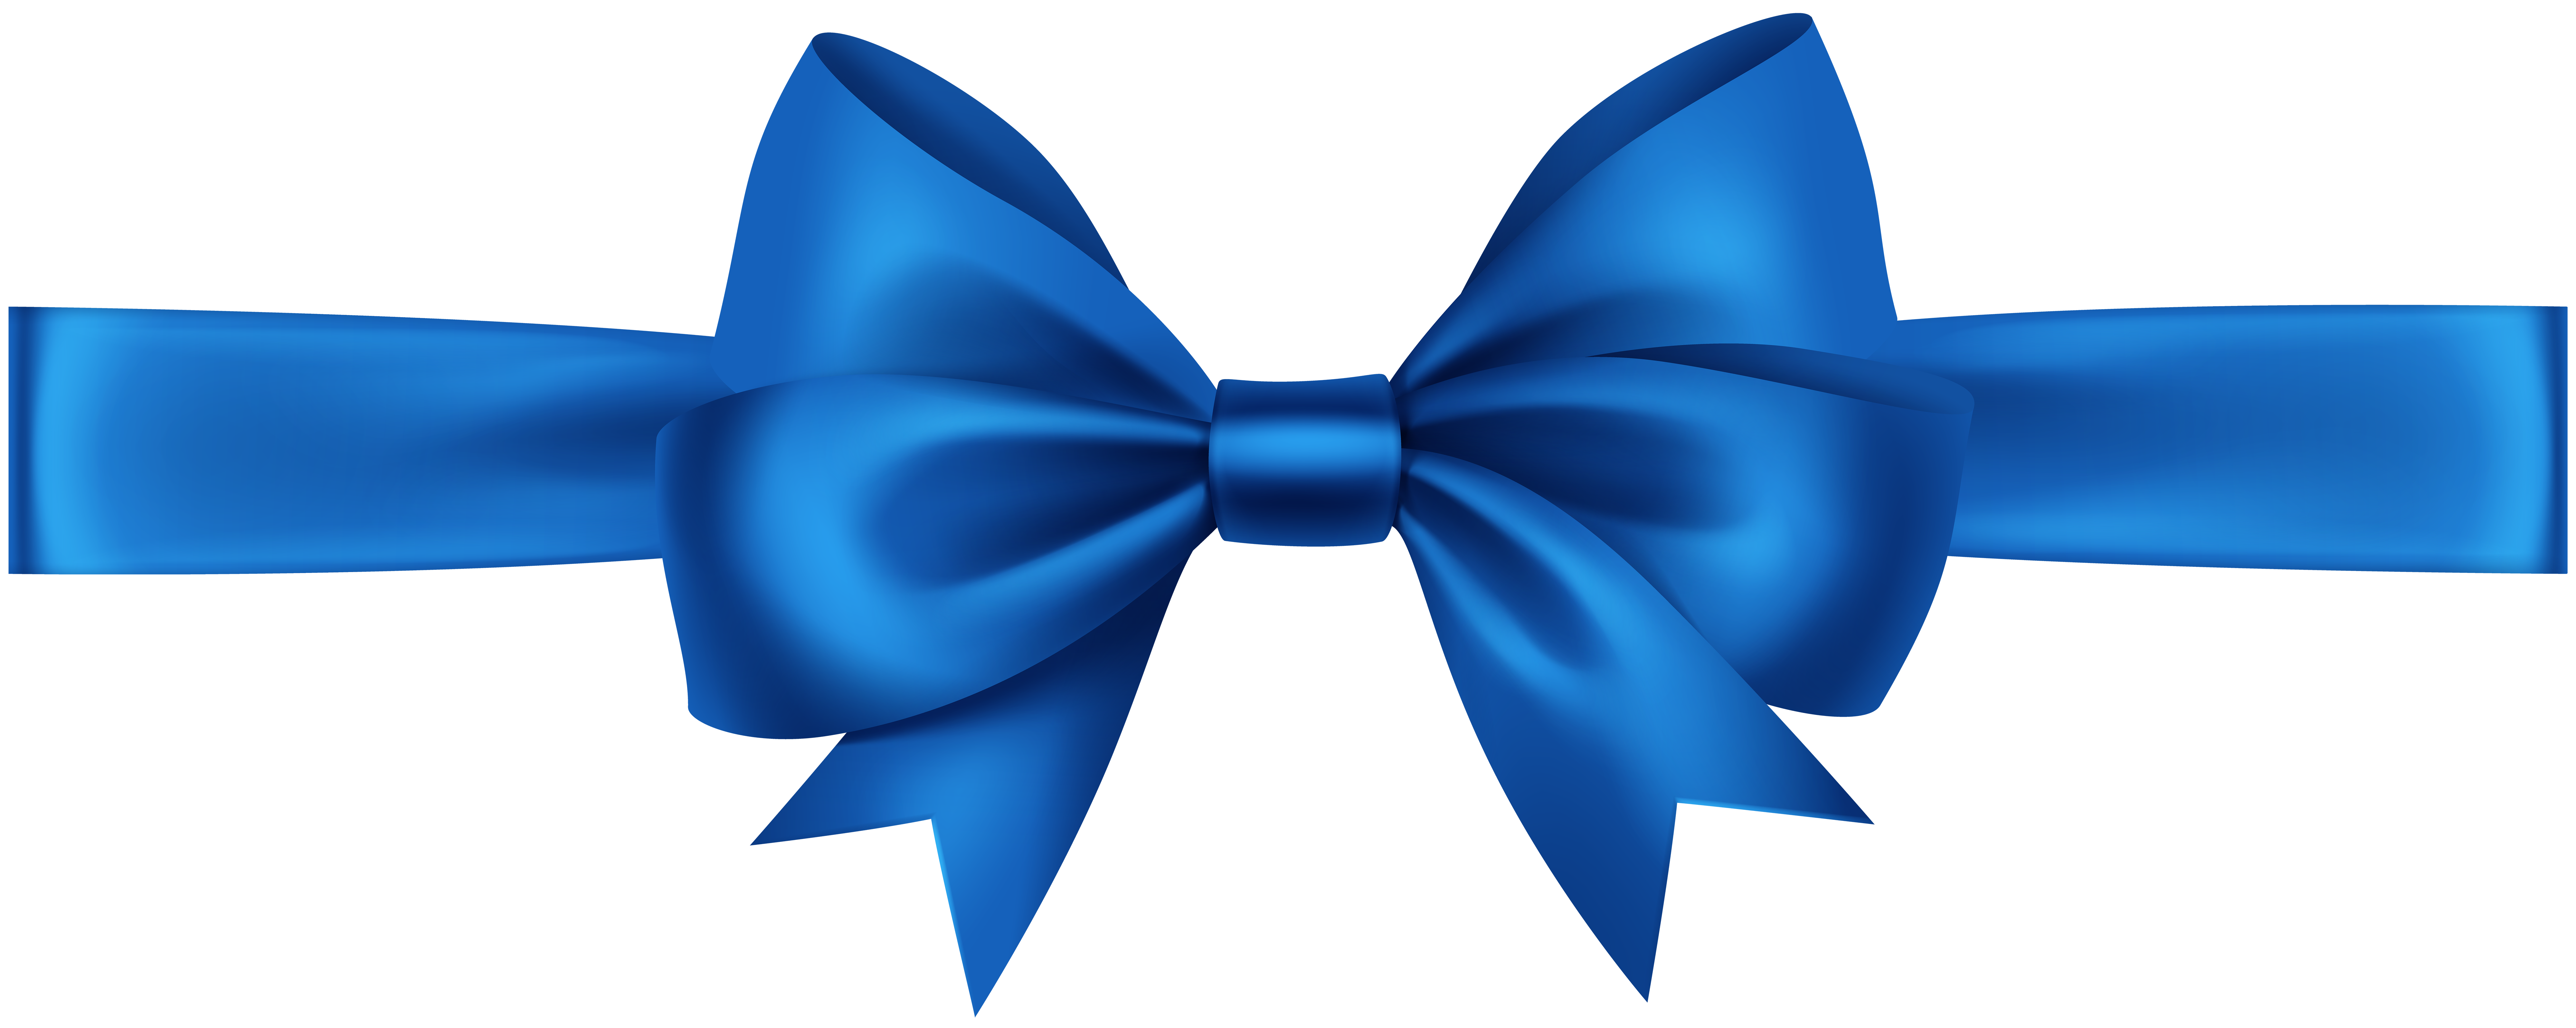 Simple Ribbon Clipart Transparent Background, Simple Blue Ribbon, Ribbon  Clipart, Blue, Simple PNG Image For Free Download